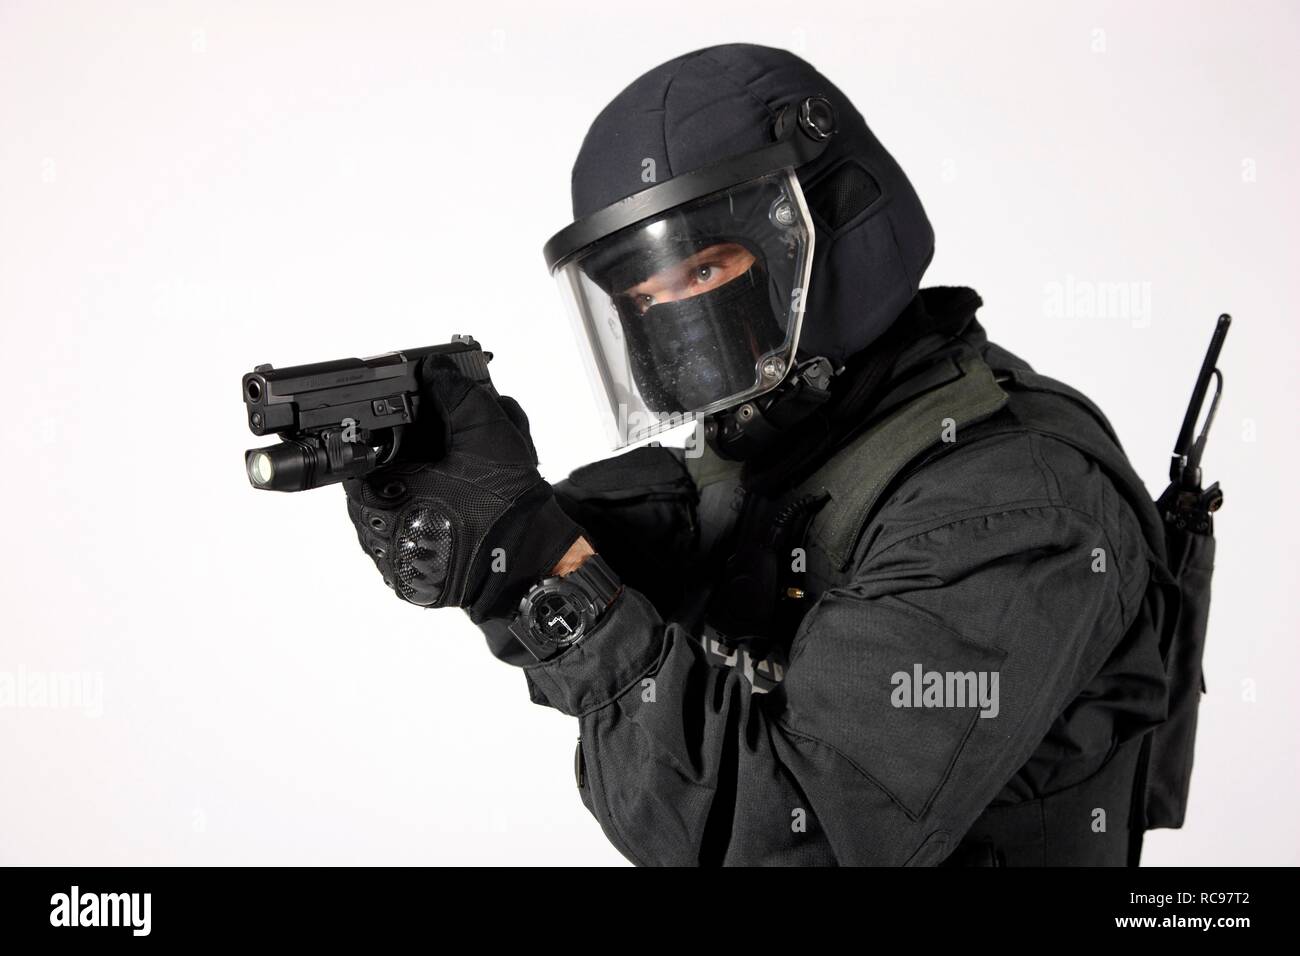 Police, Special Task Force, SEK, officer wearing full protective uniform holding a Sig Sauer P6 P225 pistol Stock Photo